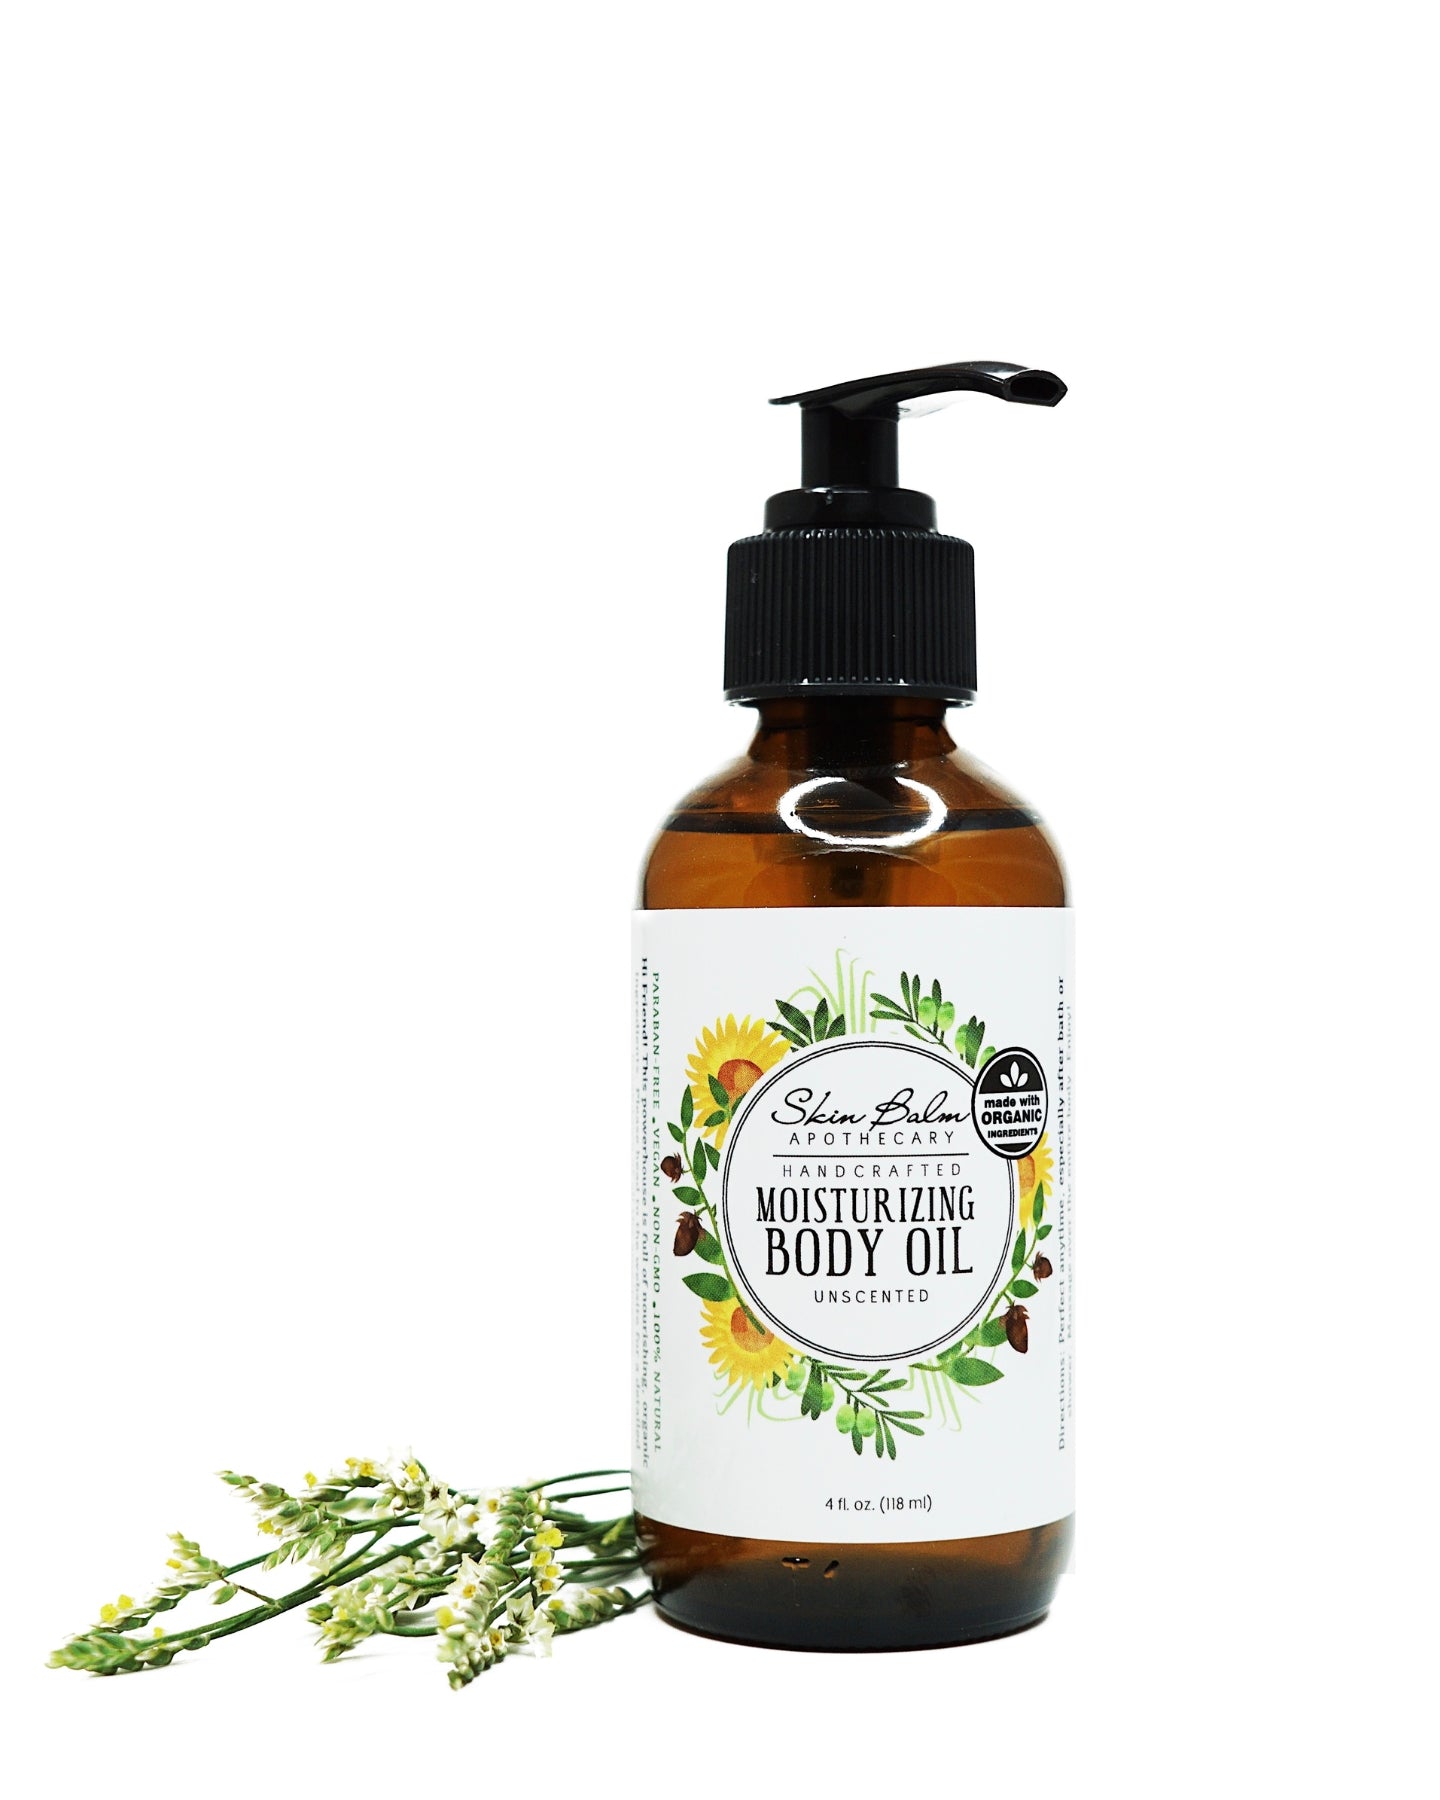 Unscented Moisturizing Body Oil with green foliage against a white background.